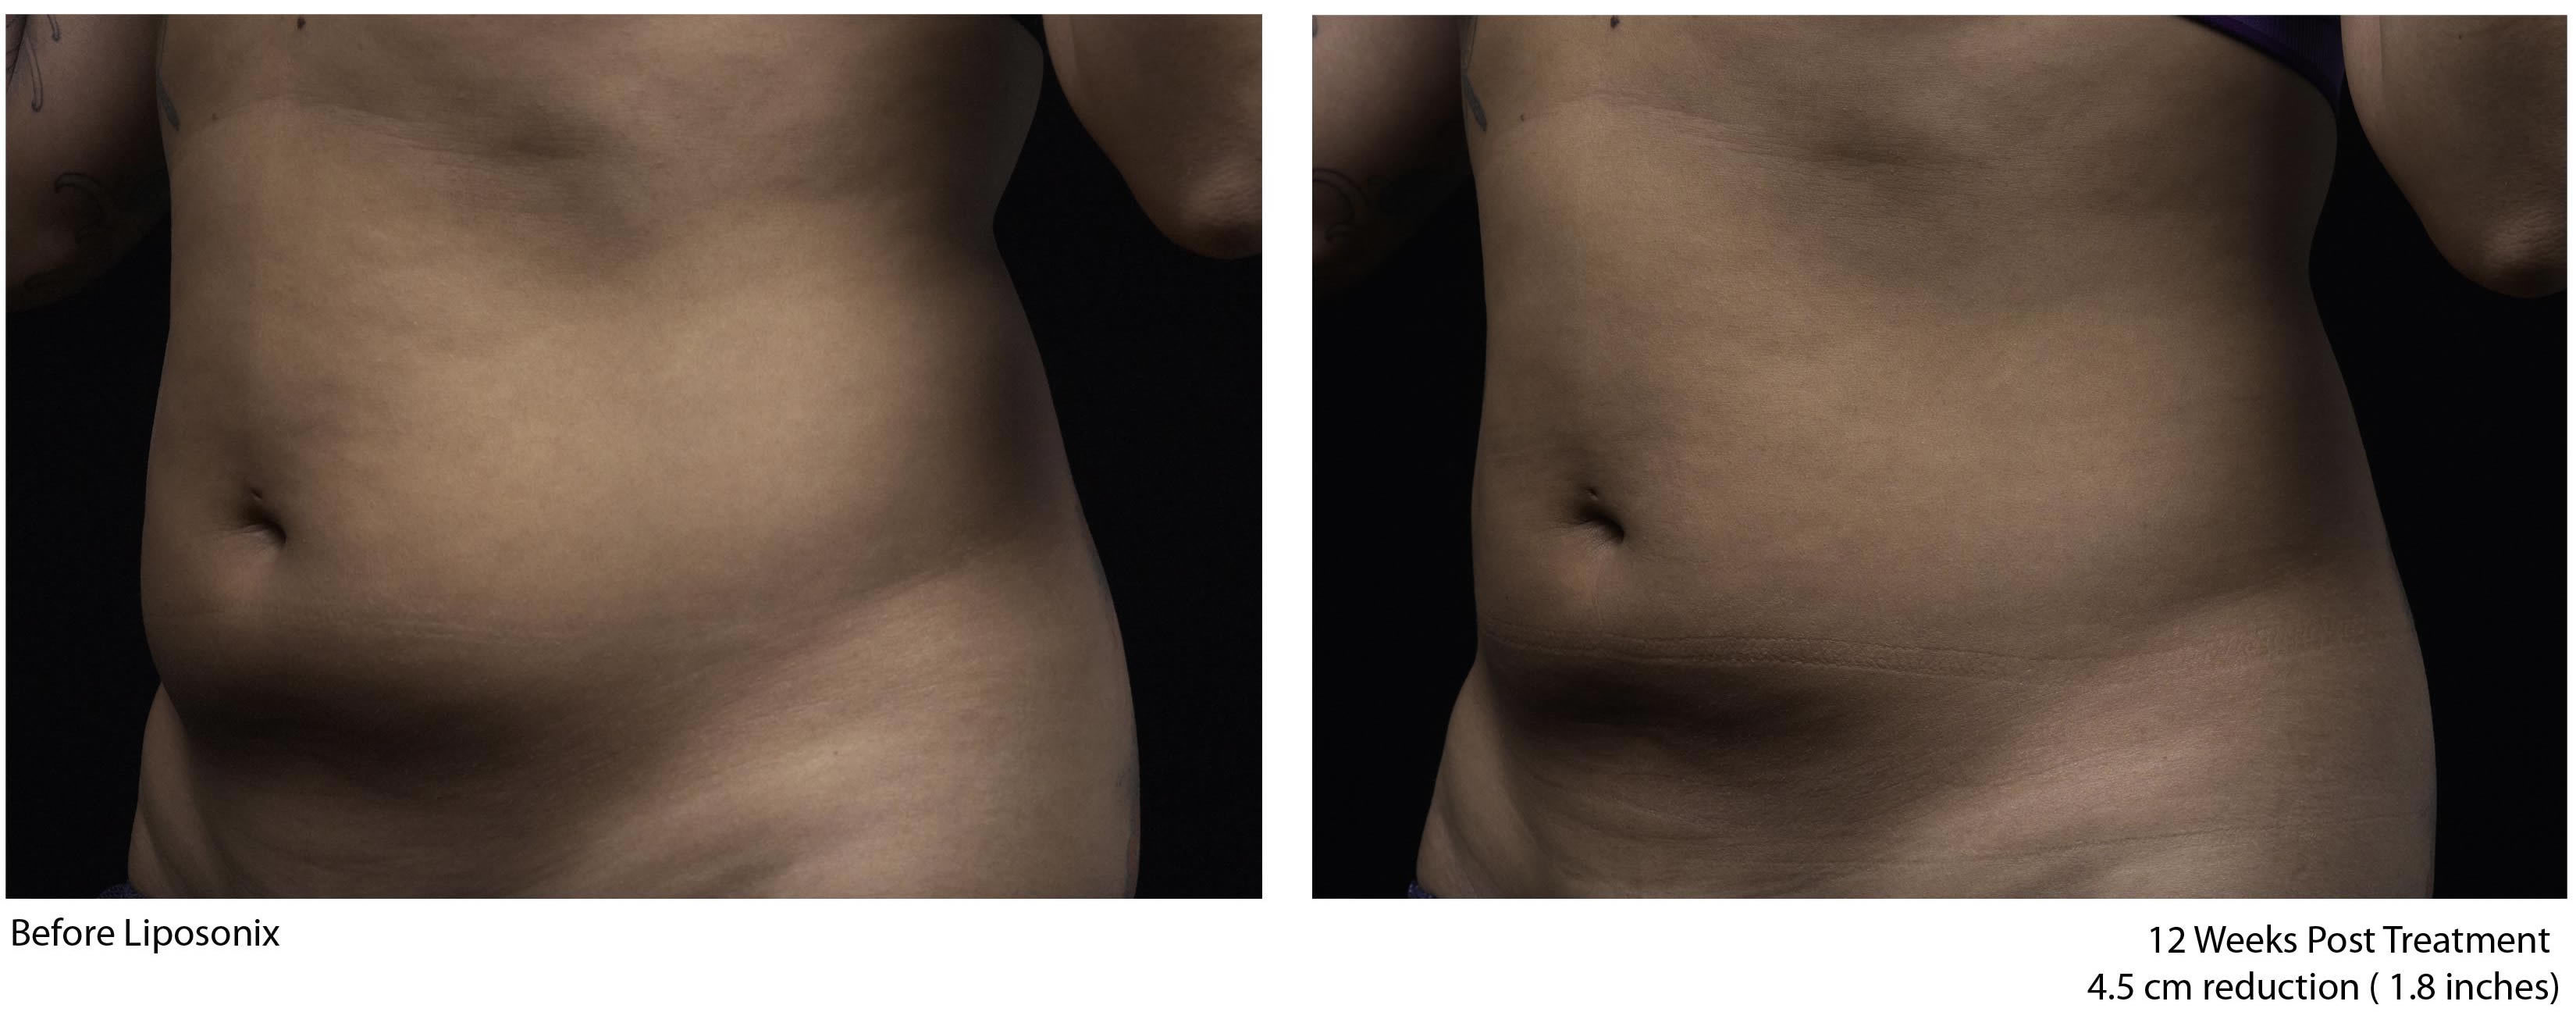 Liposonix NYC Before and After Photos.